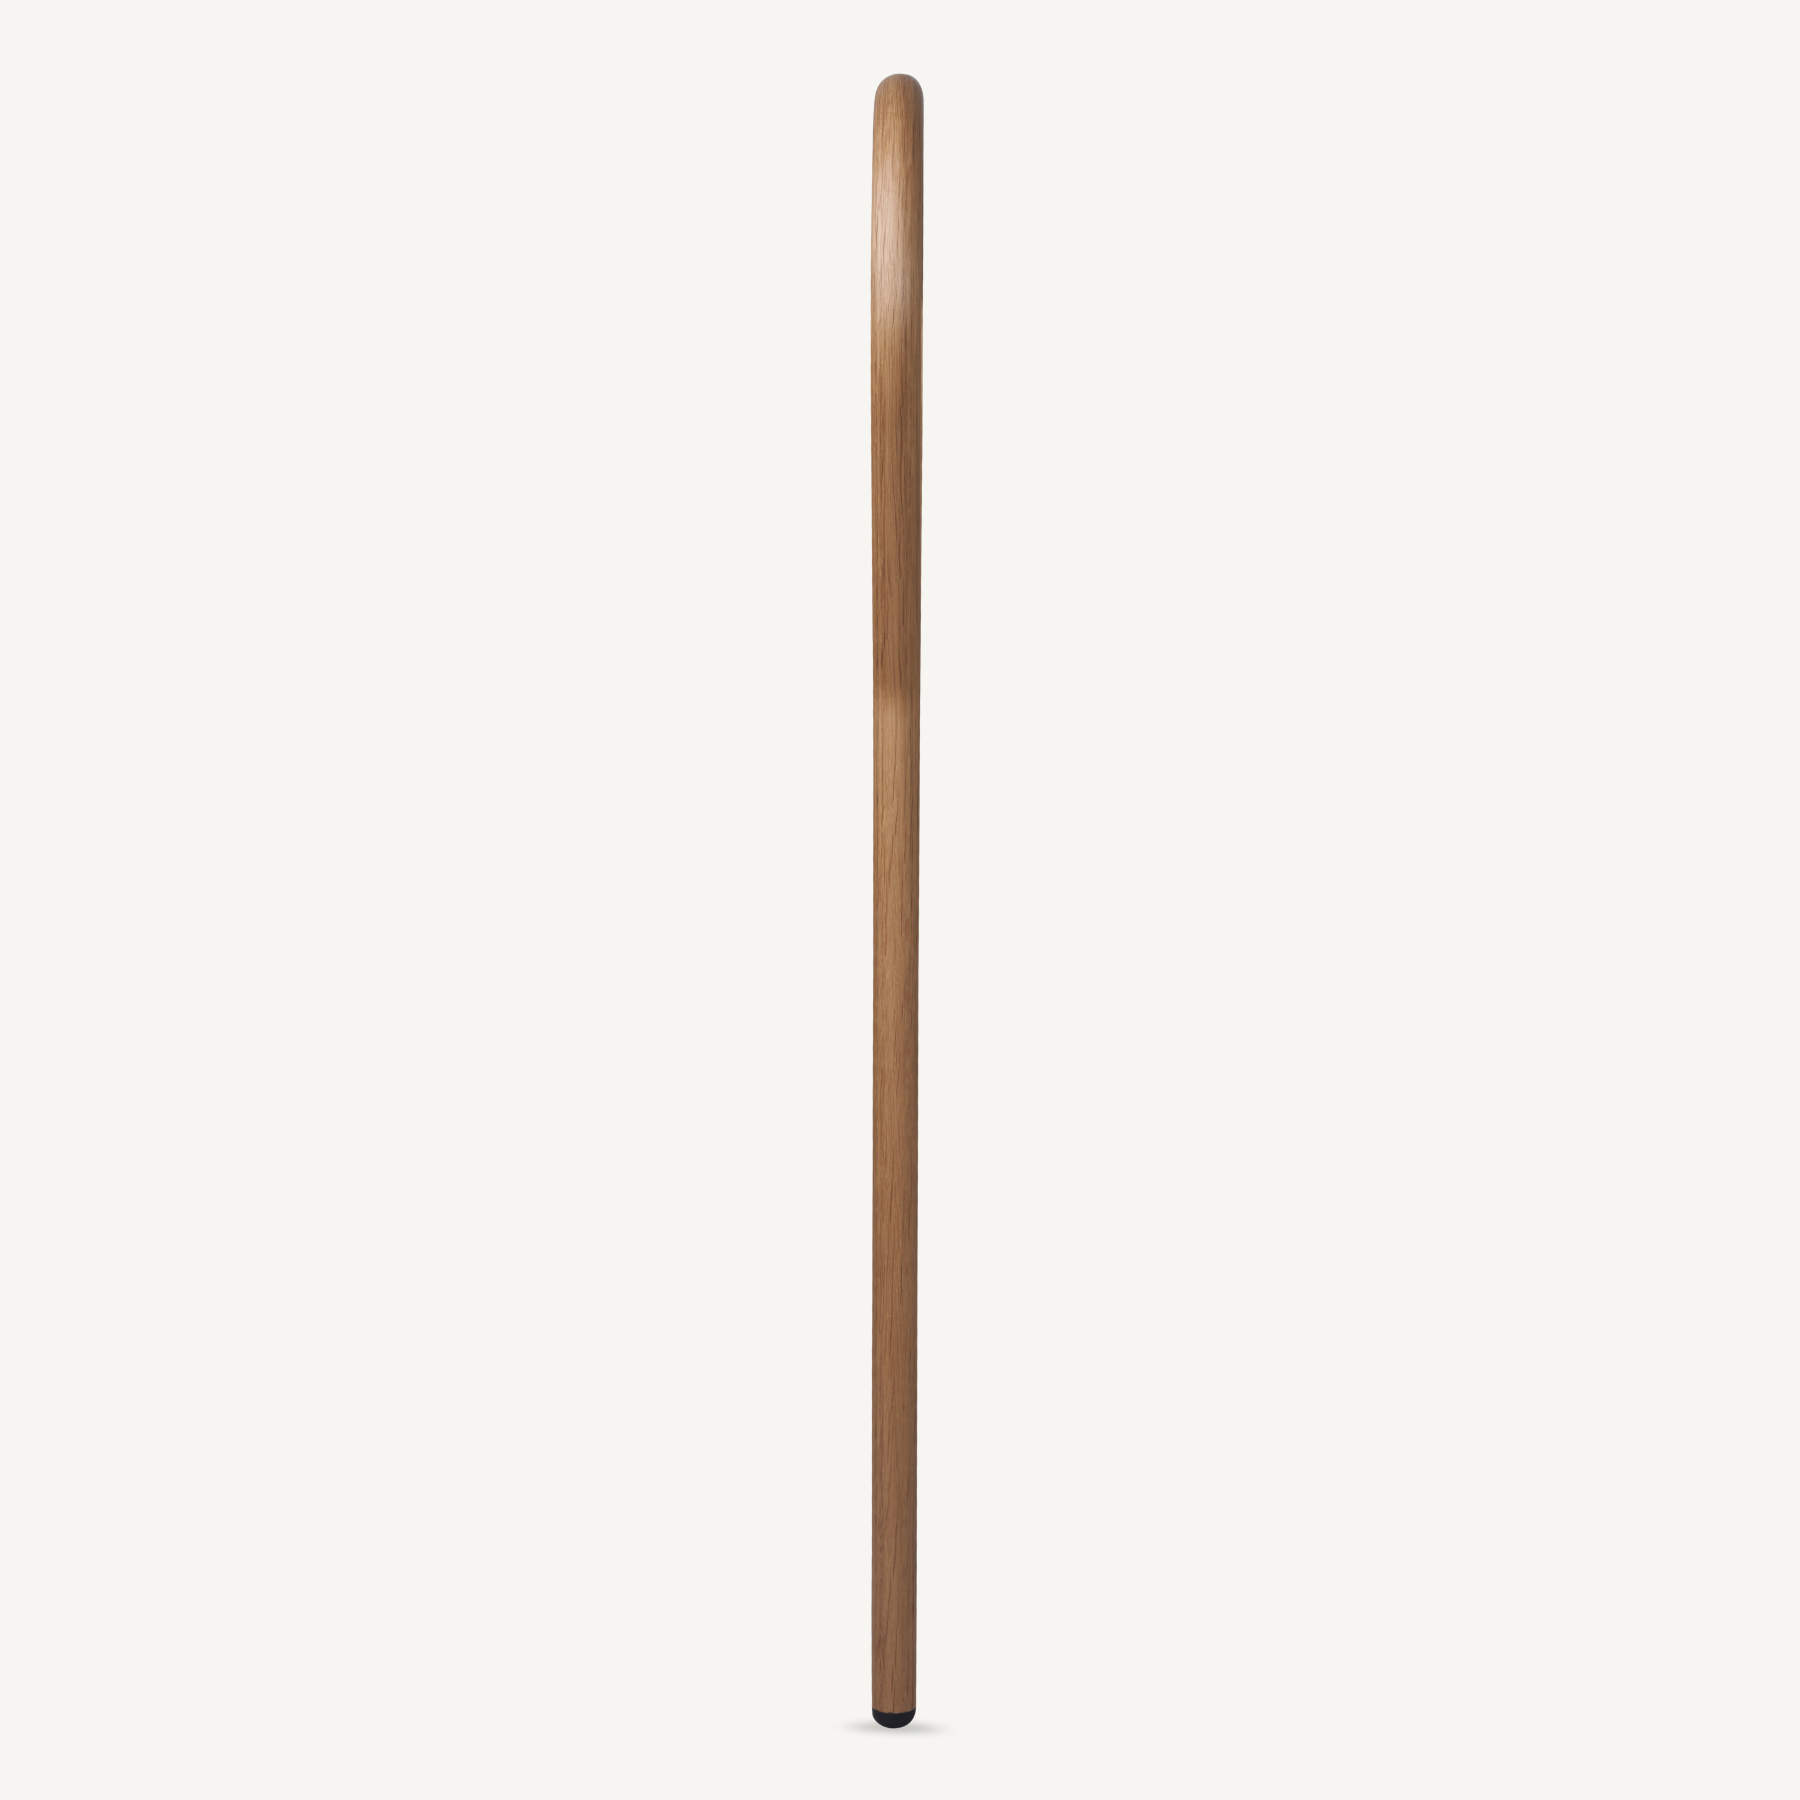 An aesthetic and functional cane